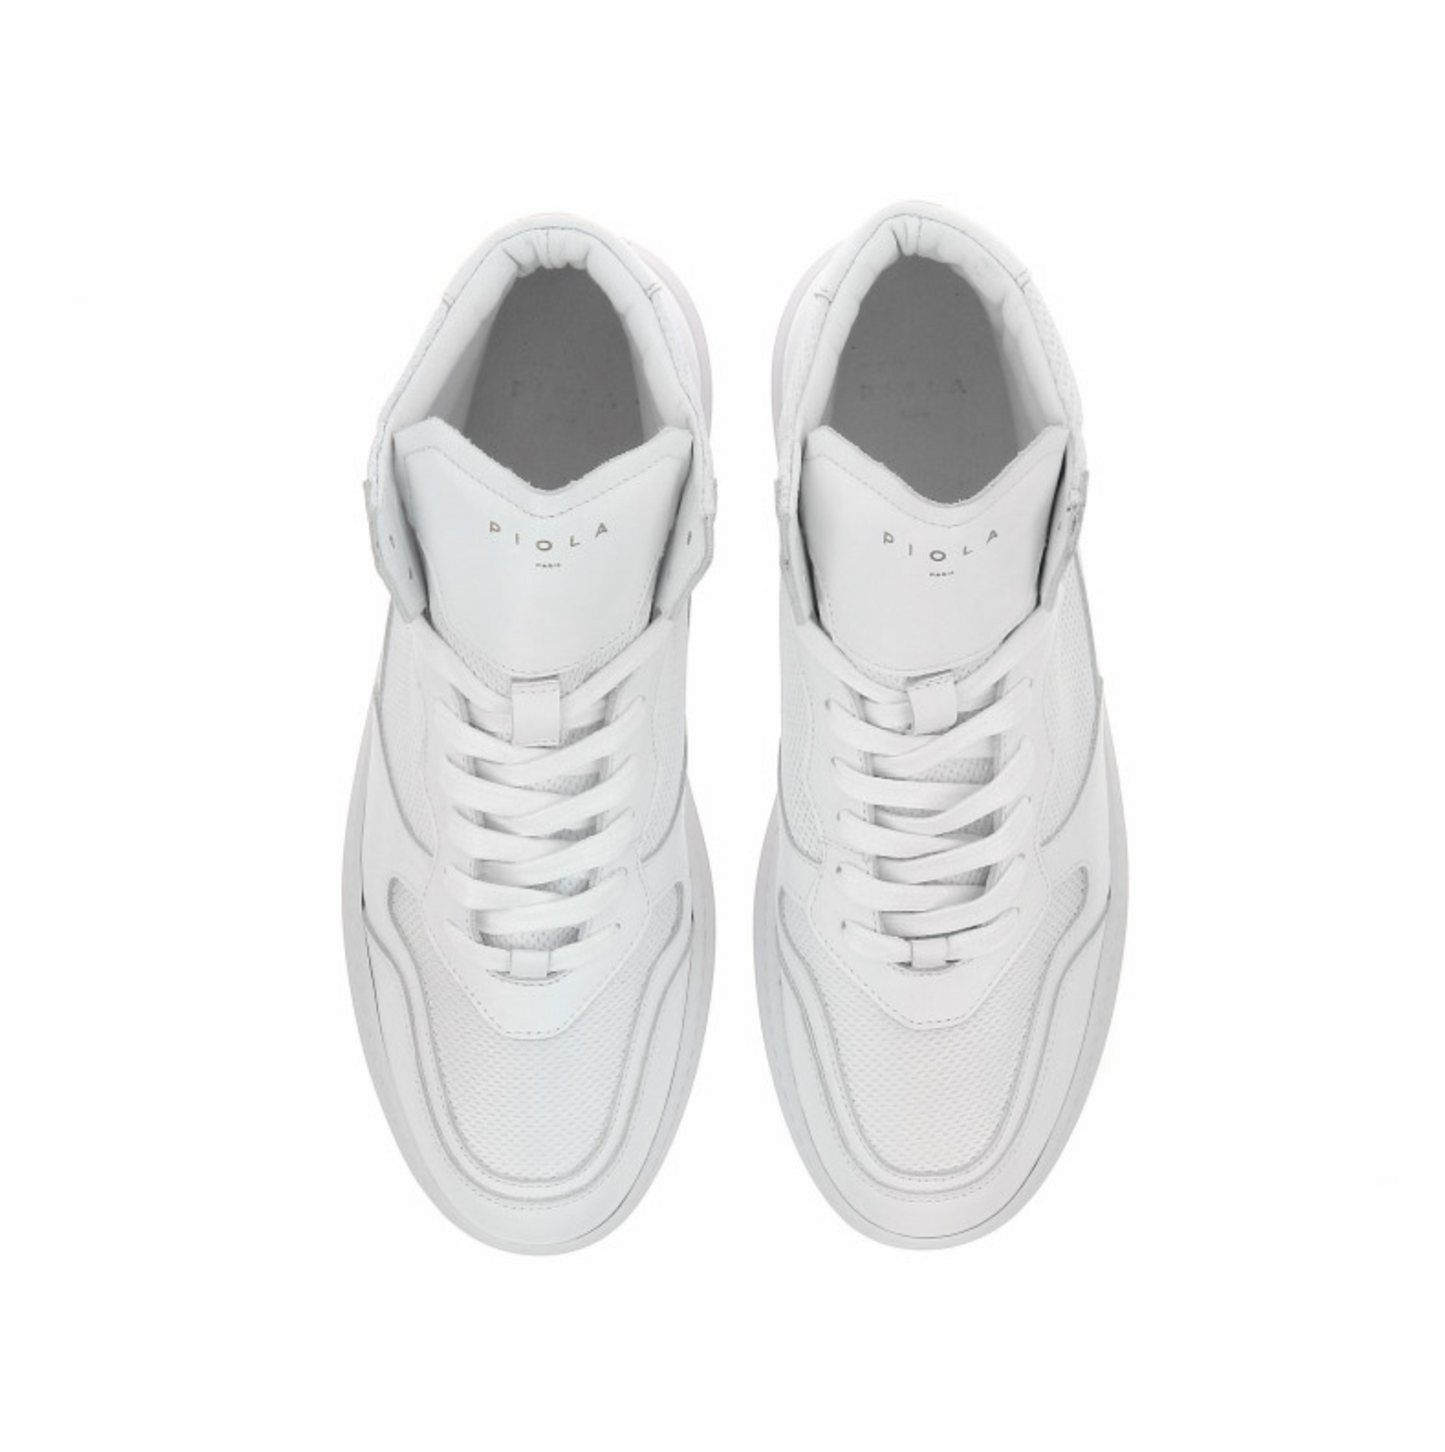 SNEAKERS CAYMA WHITE HIGH - PIOLA